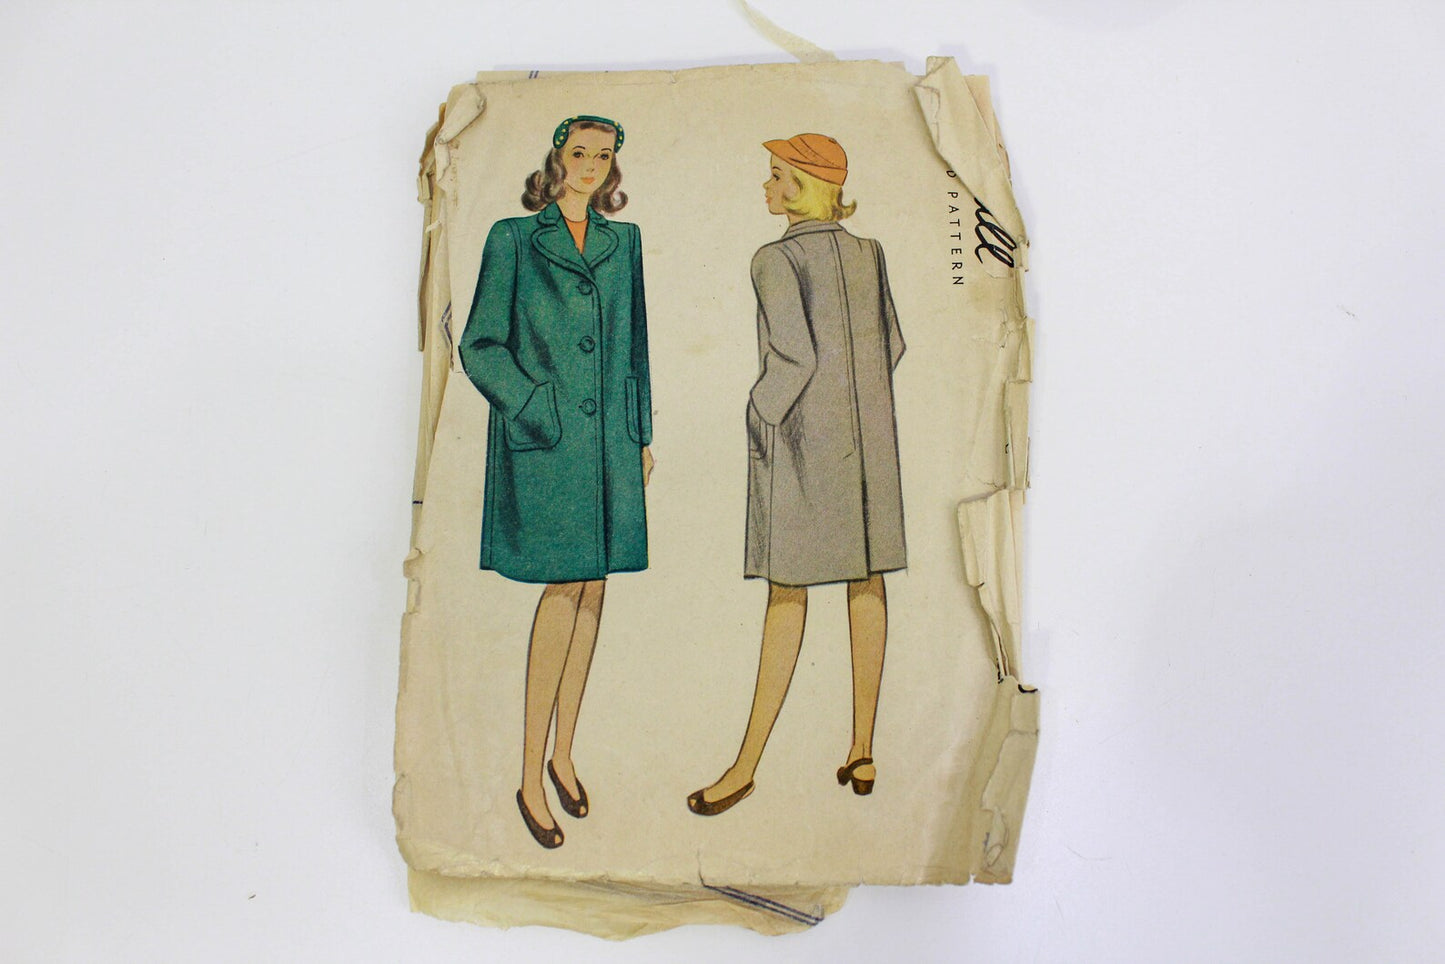 Vintage 1940s Girl's Coat Sewing Pattern, McCall 5960, Bust 30", Complete, Cut